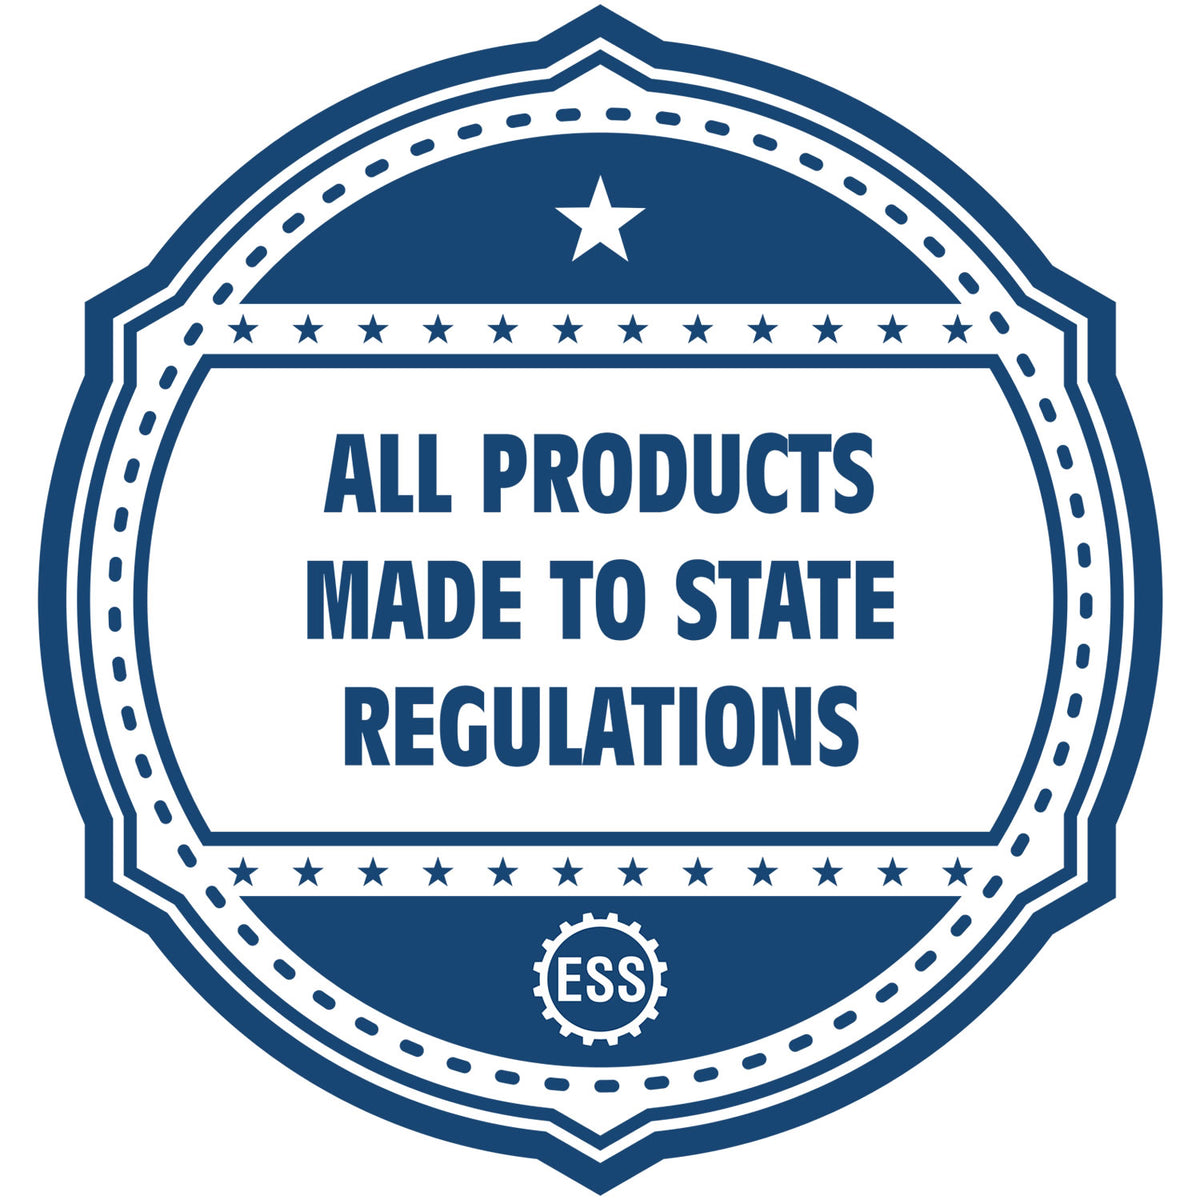 An icon or badge element for the Self-Inking Rectangular Arkansas Notary Stamp showing that this product is made in compliance with state regulations.